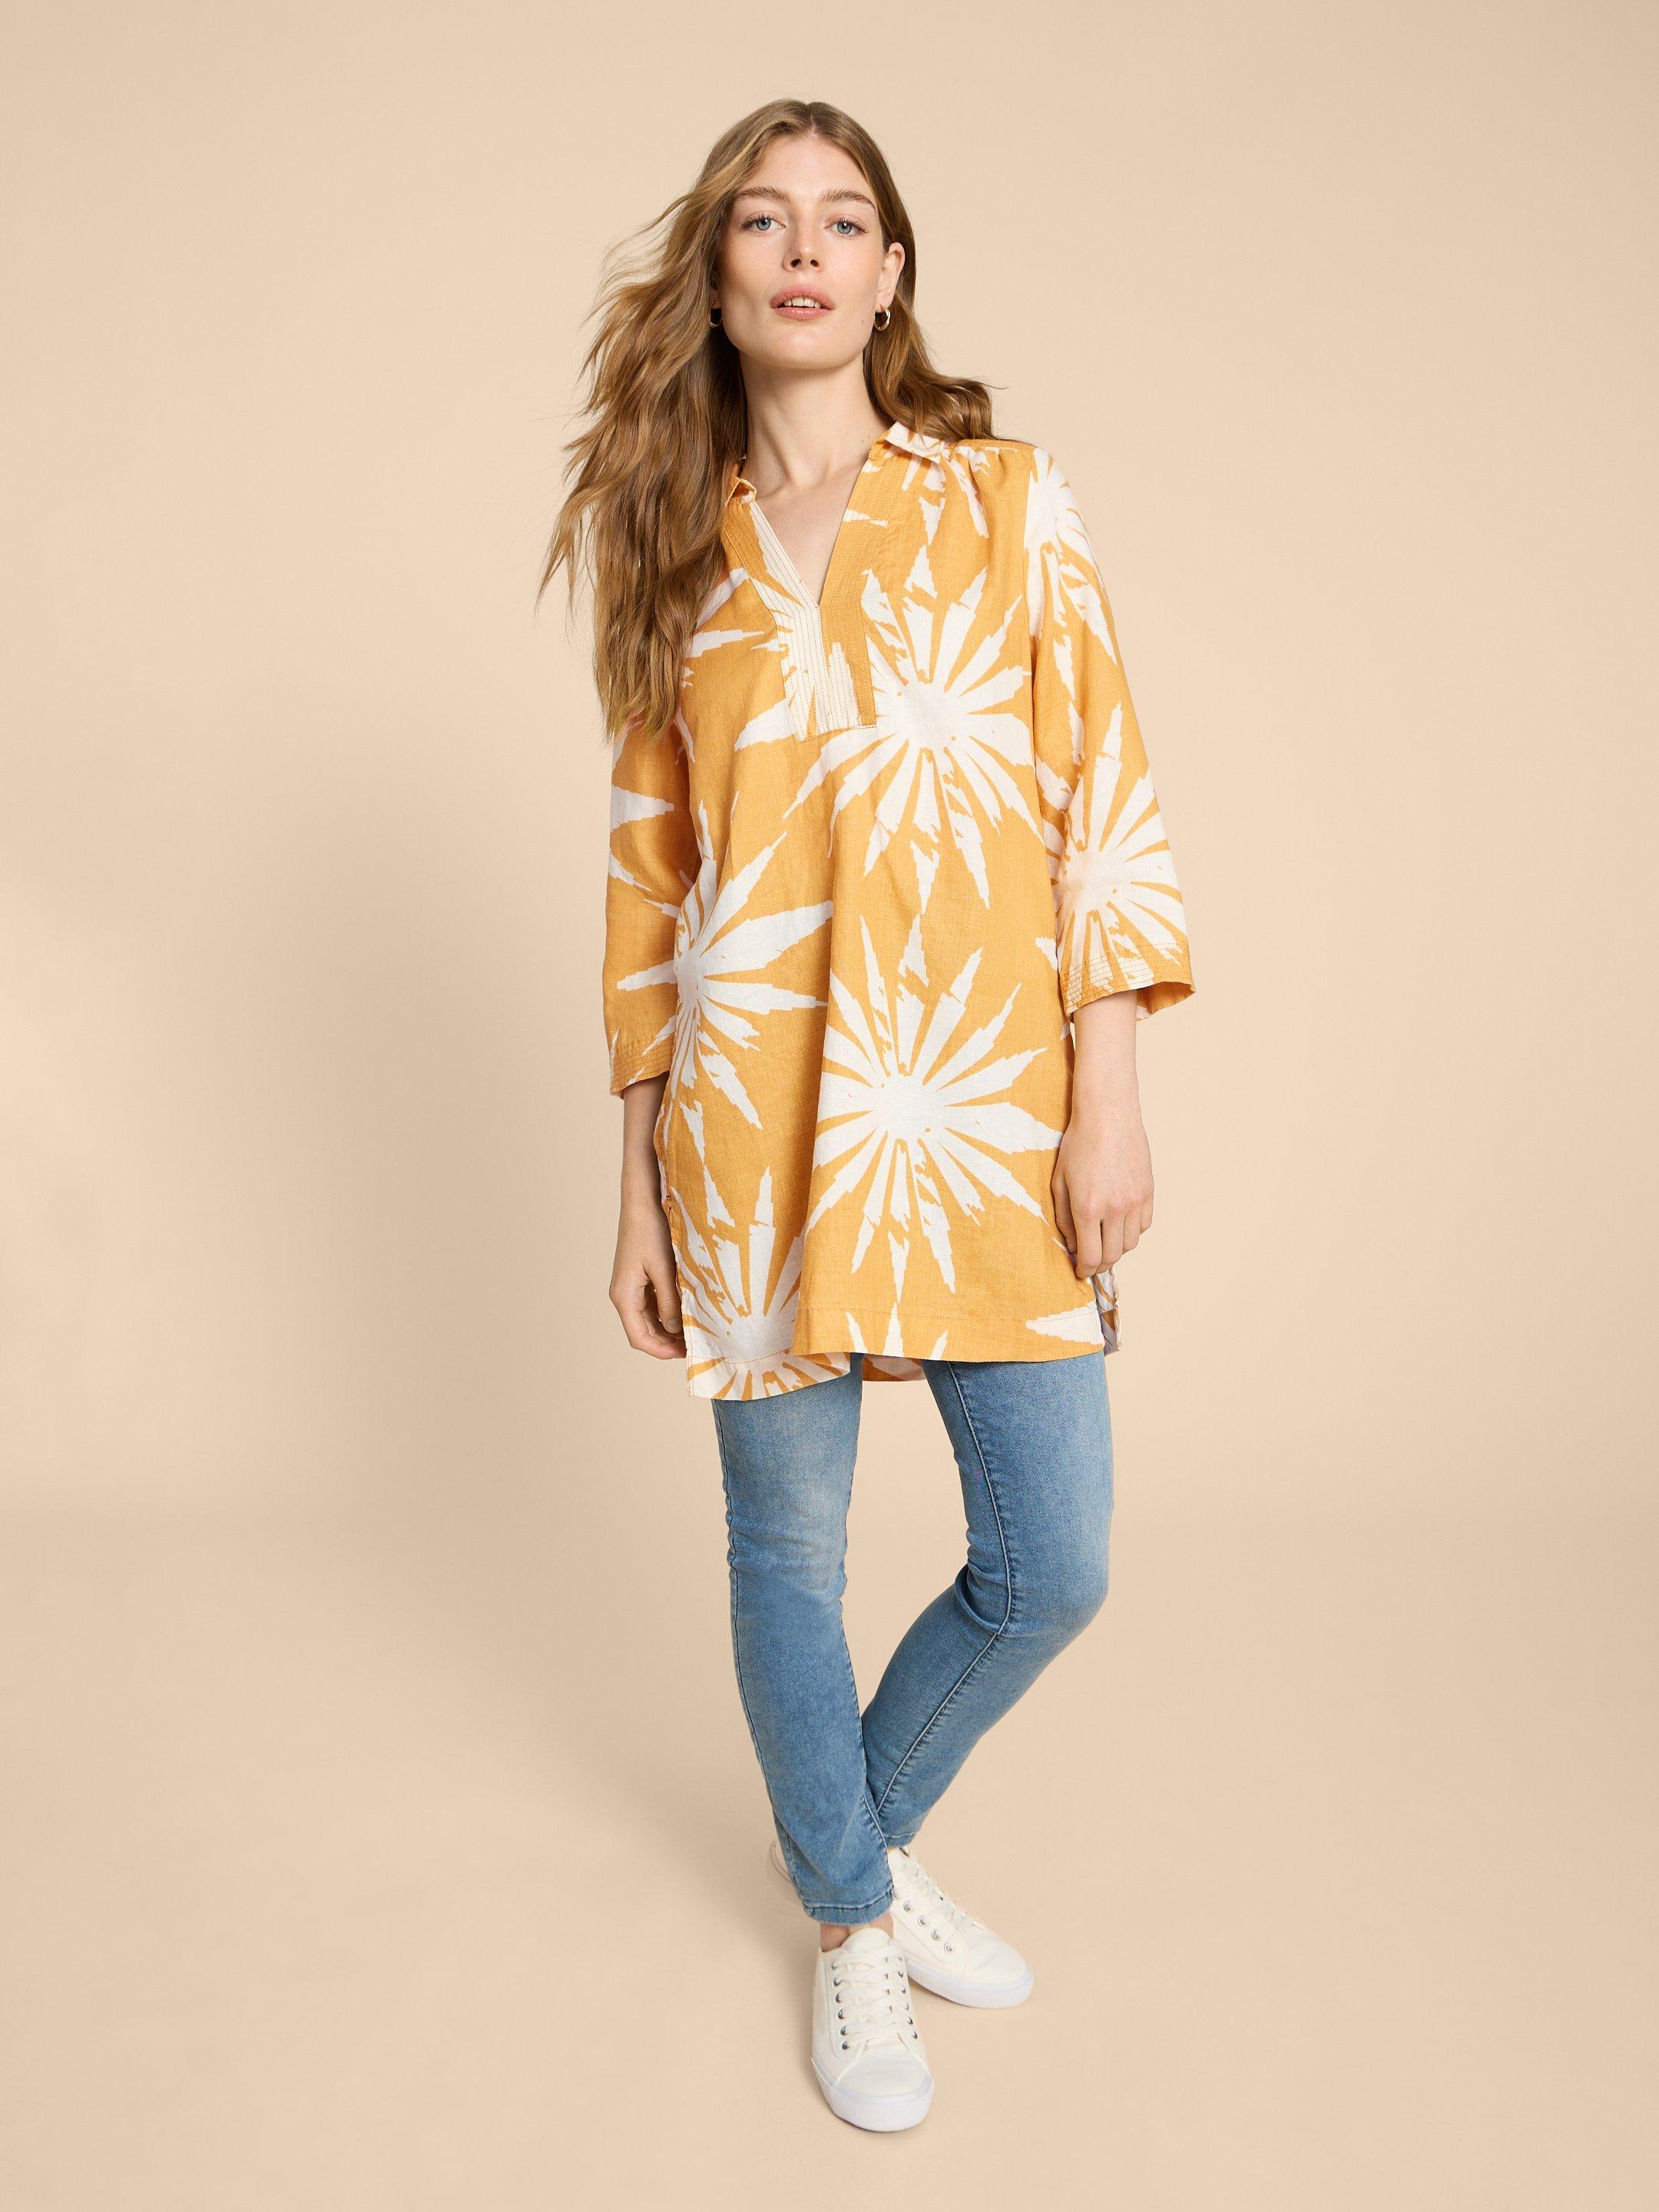 Blaire Linen Tunic in CHART PR - LIFESTYLE